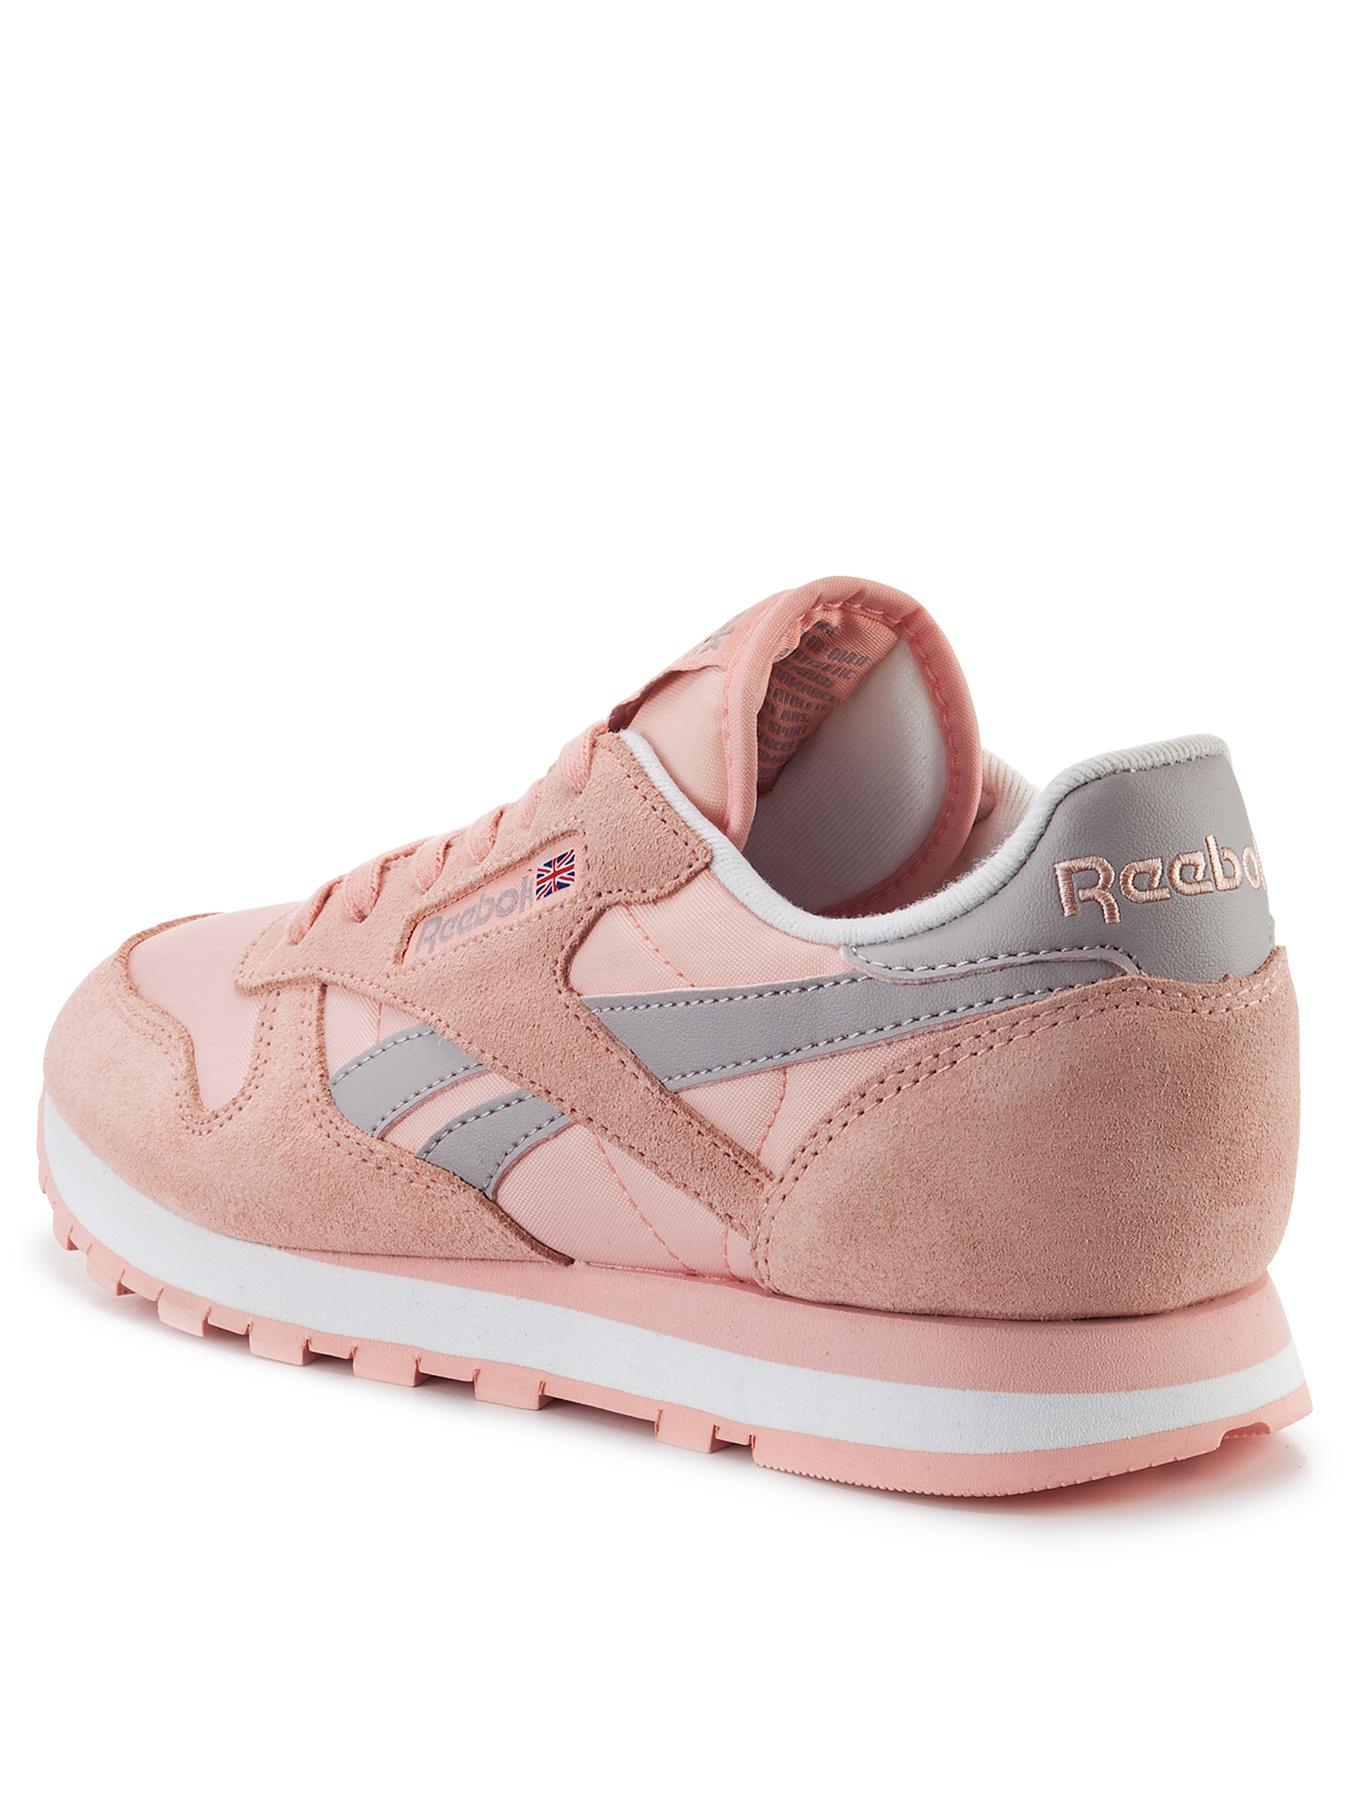 womens pink trainers uk